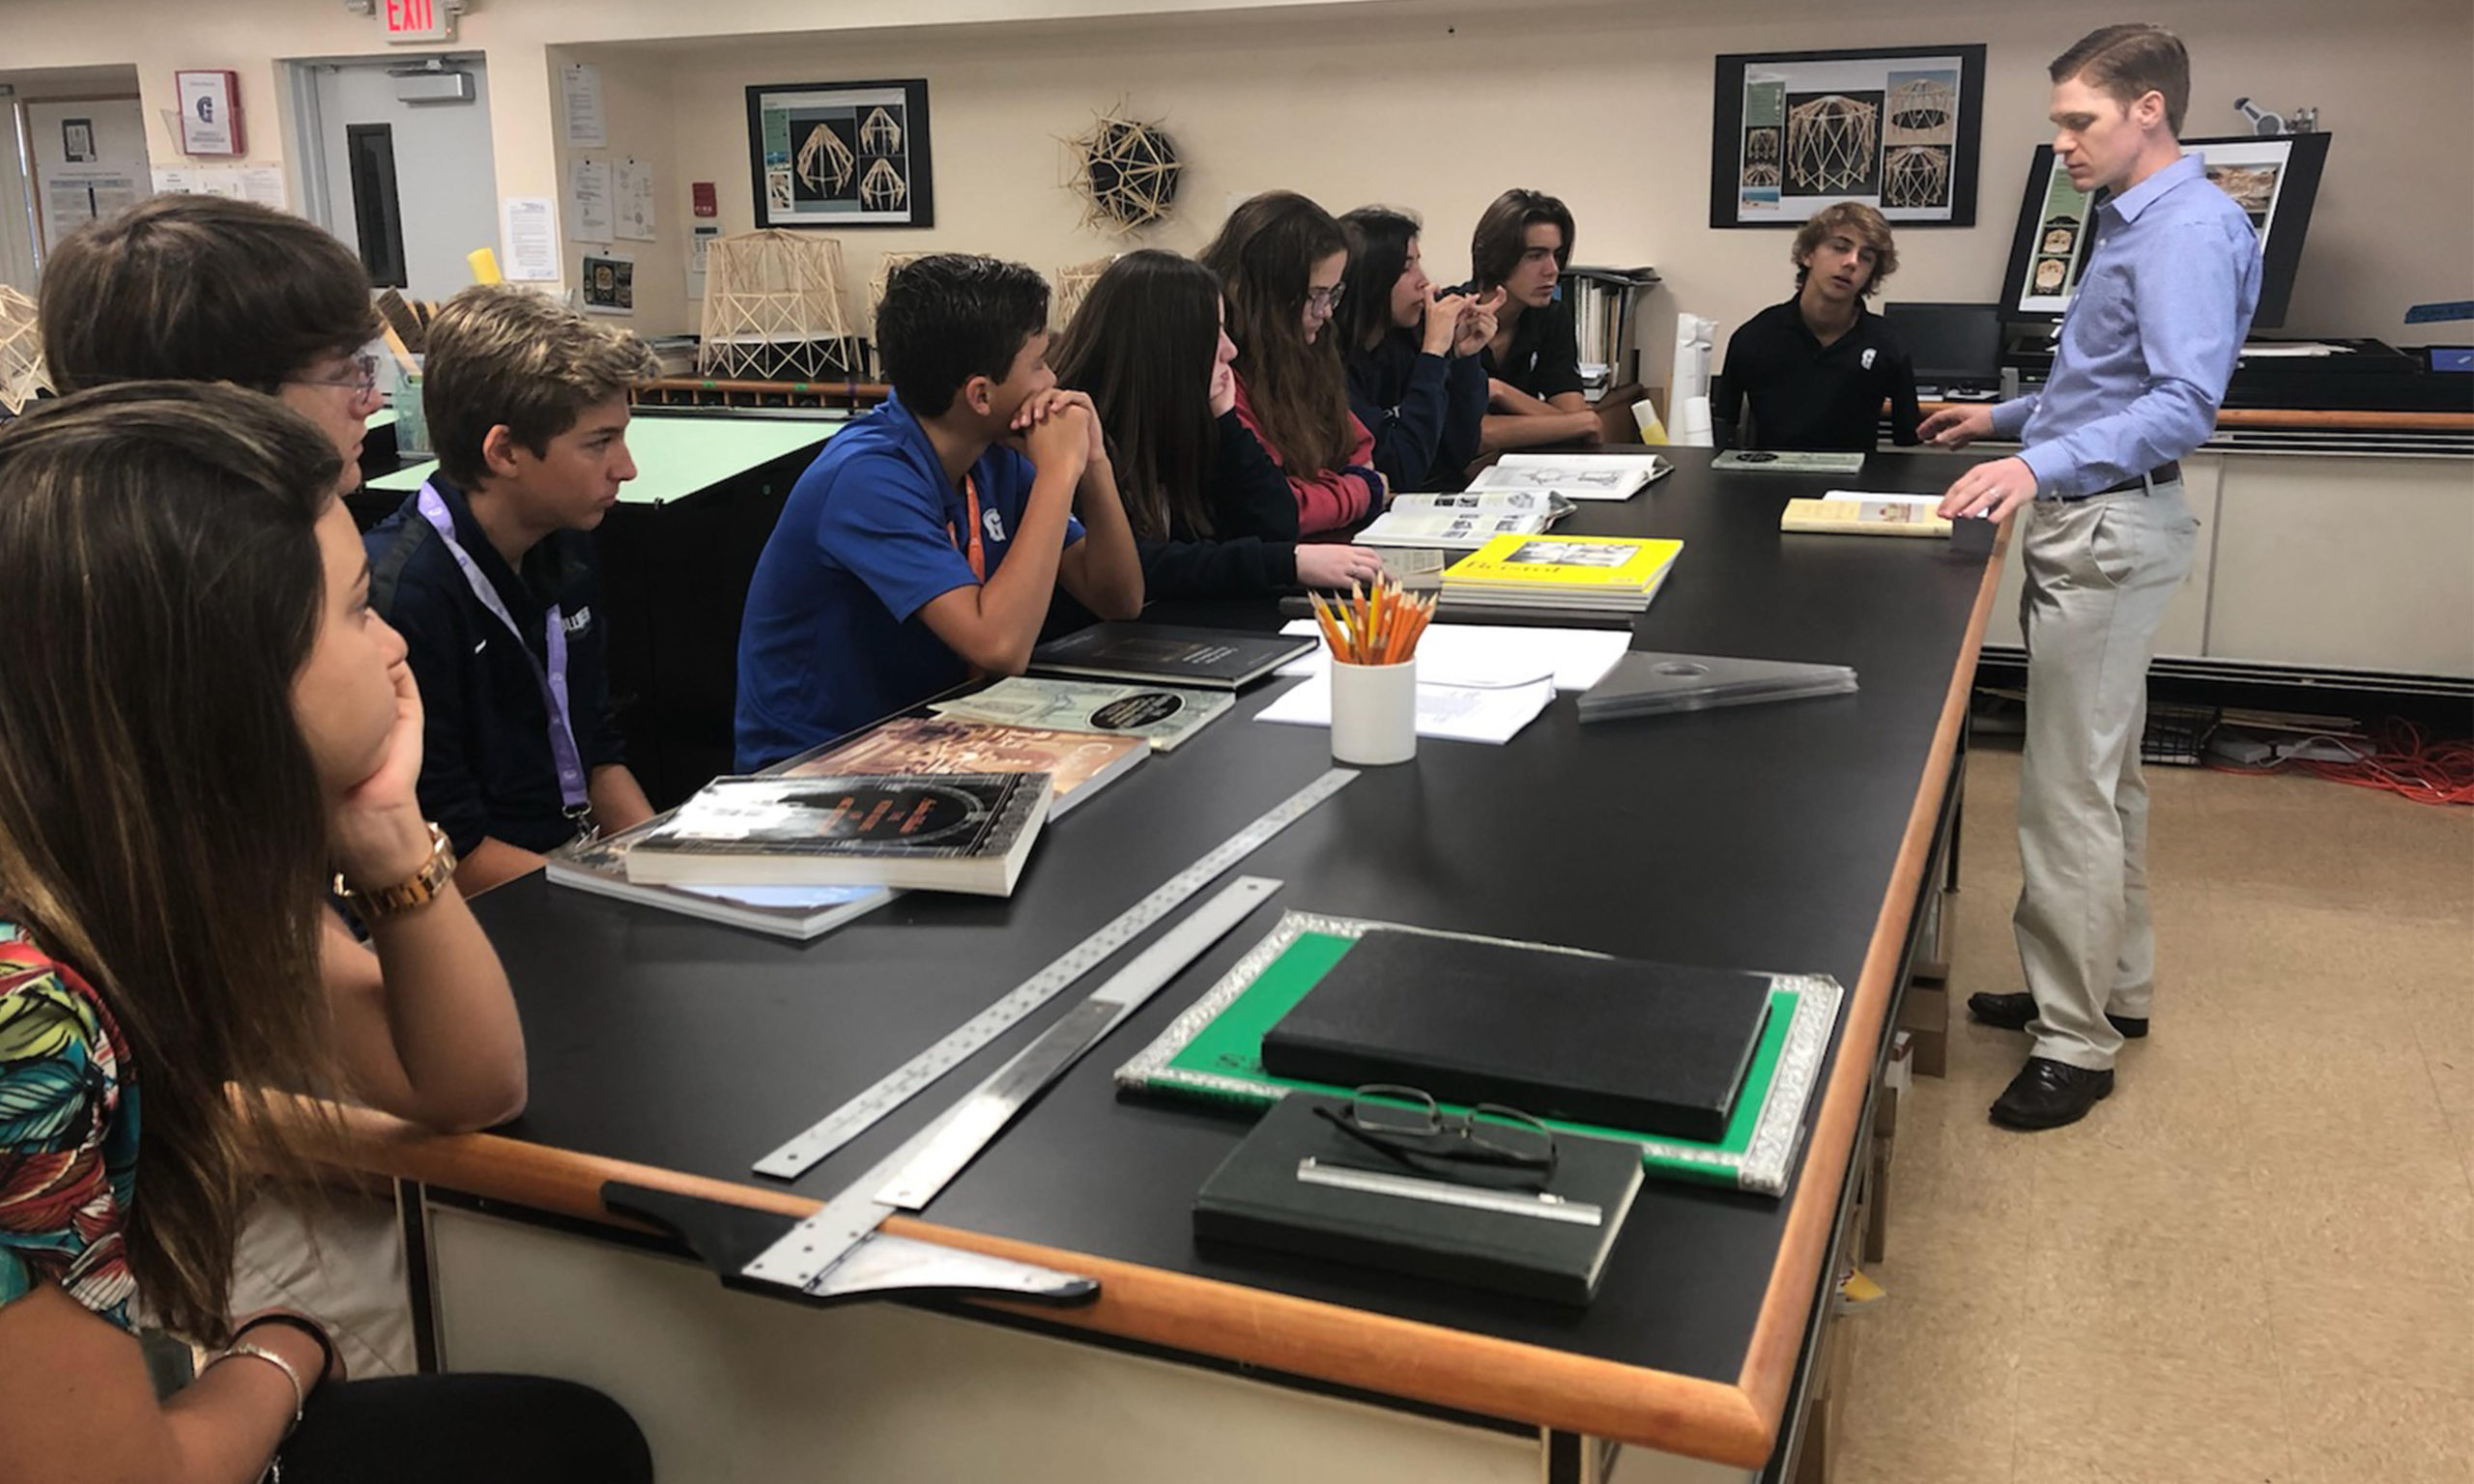 The Institute of Classical Architecture & Art (ICAA) sponsored a three-week workshop in Classical Design at Gulliver Prep.